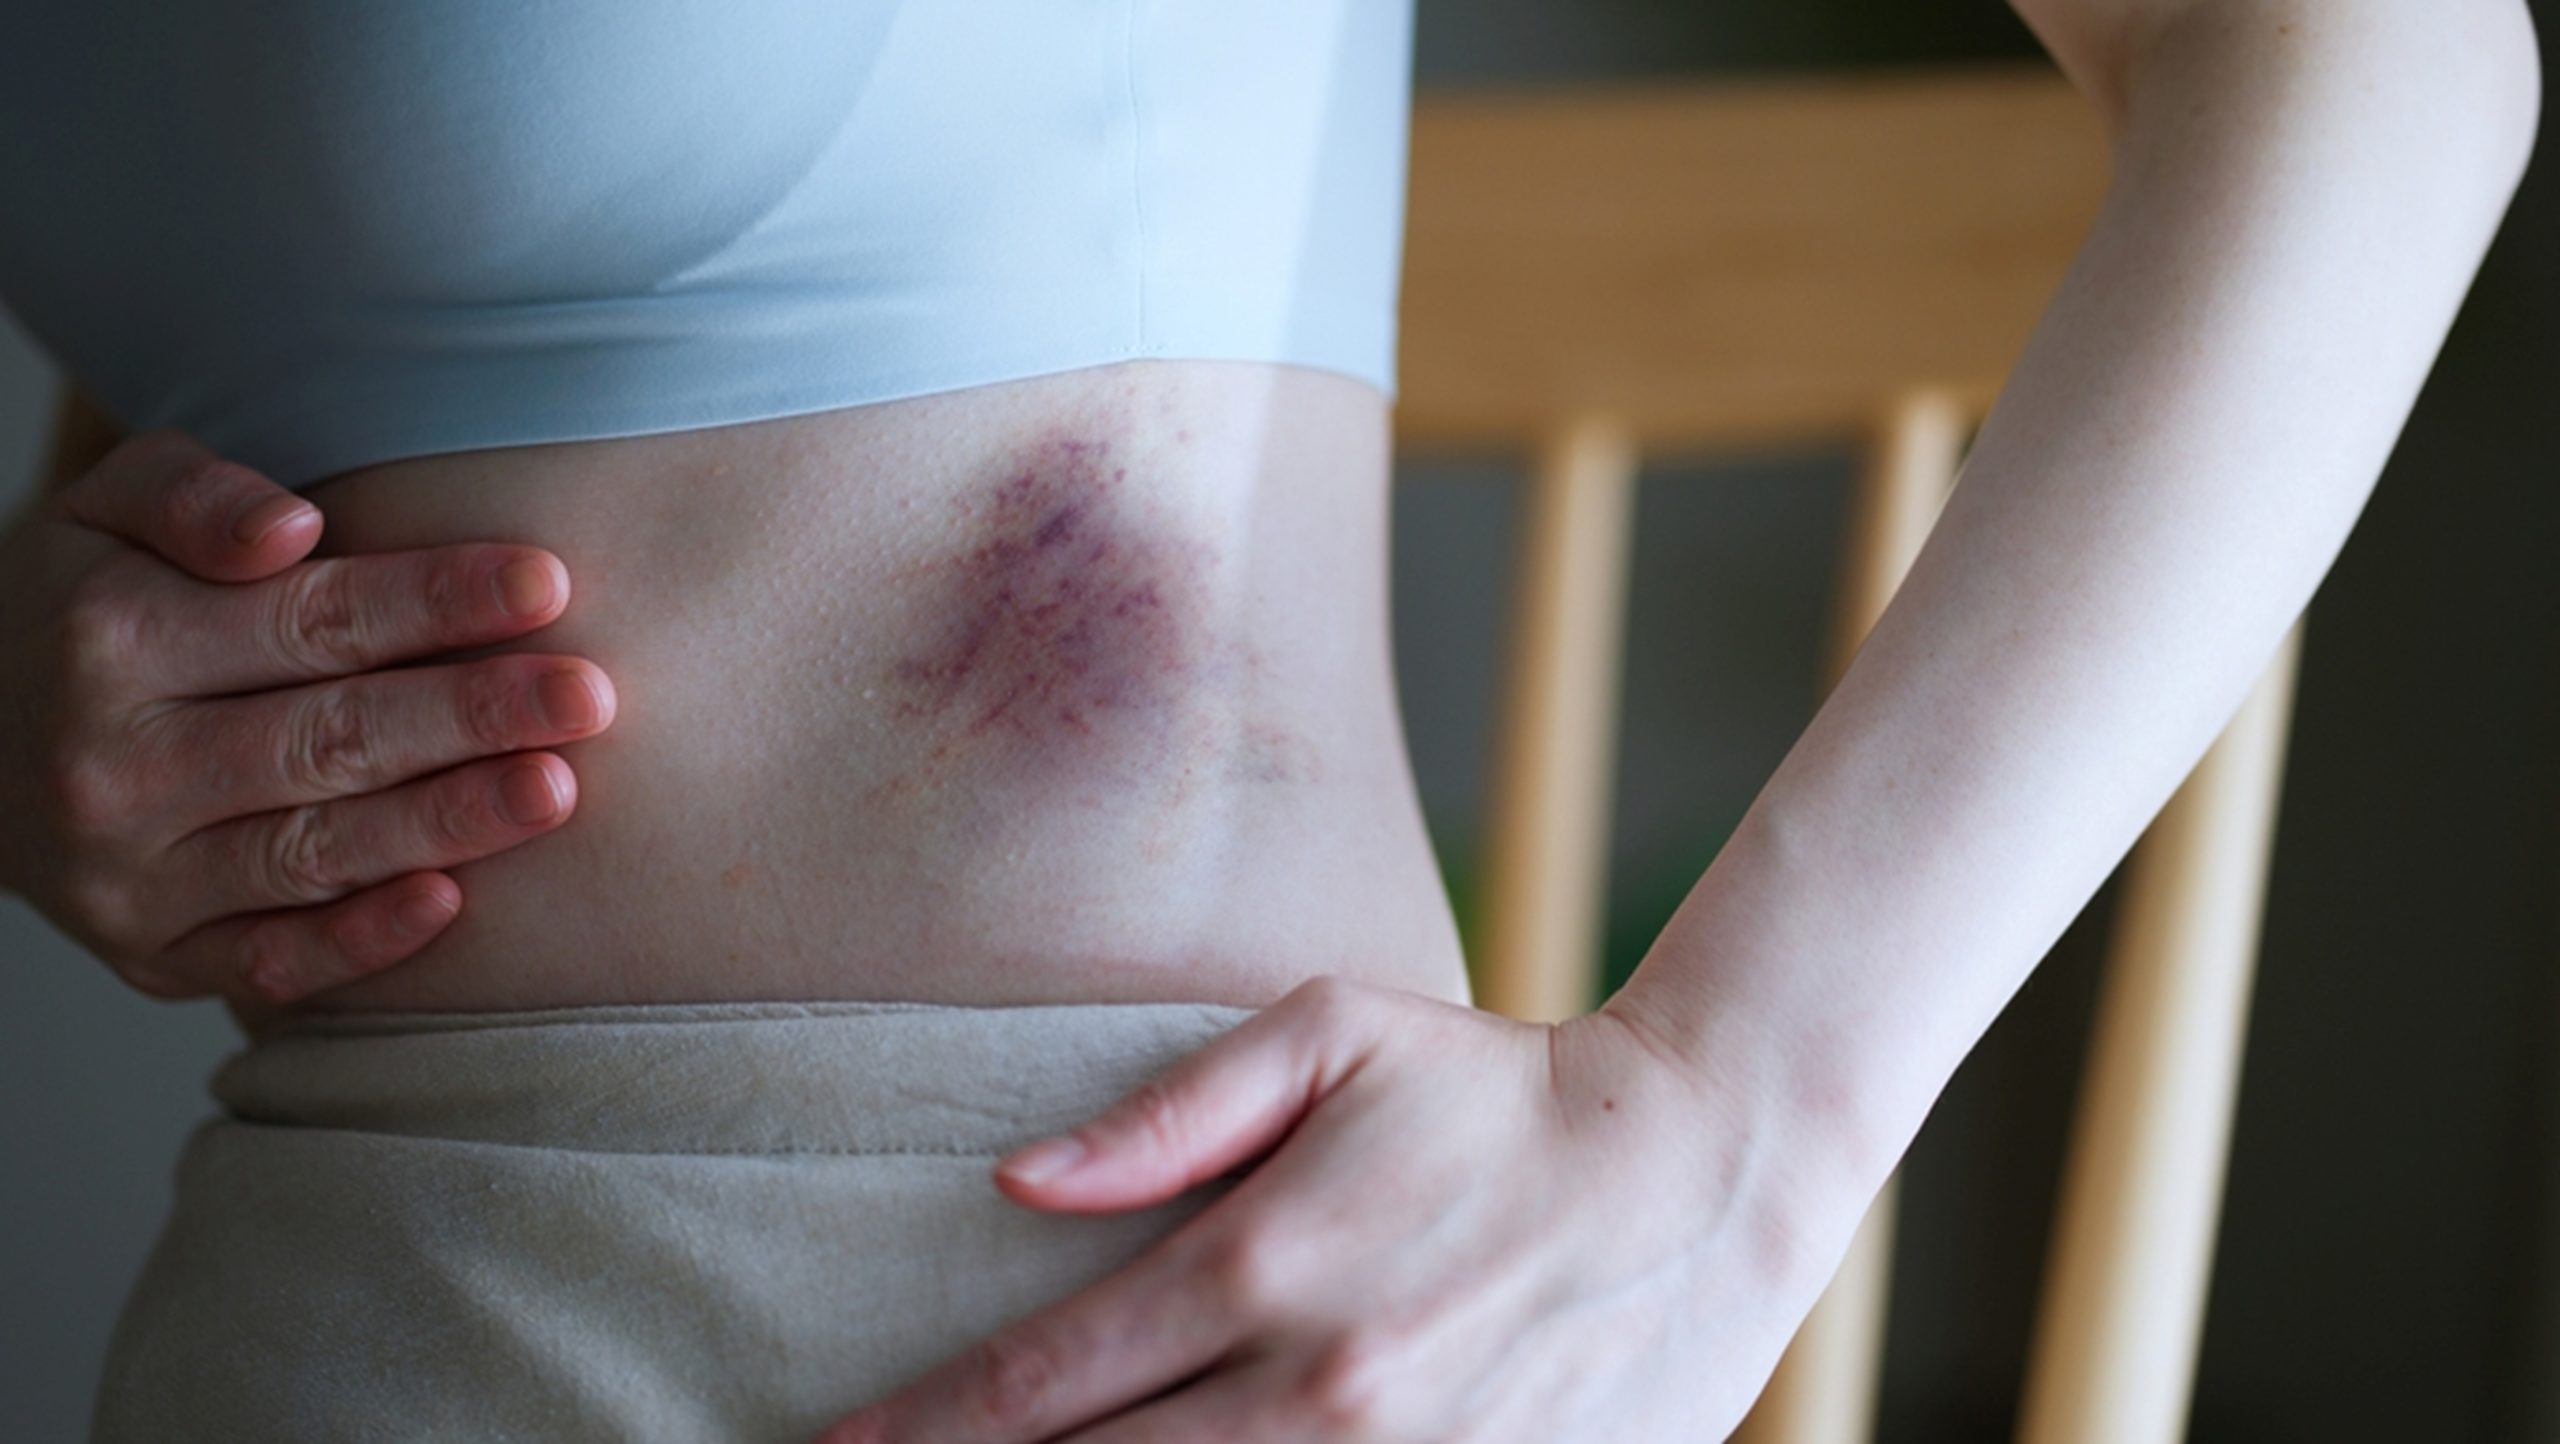 A close-up image of a woman placing her hands on her bare abdomen around a large bruised area.